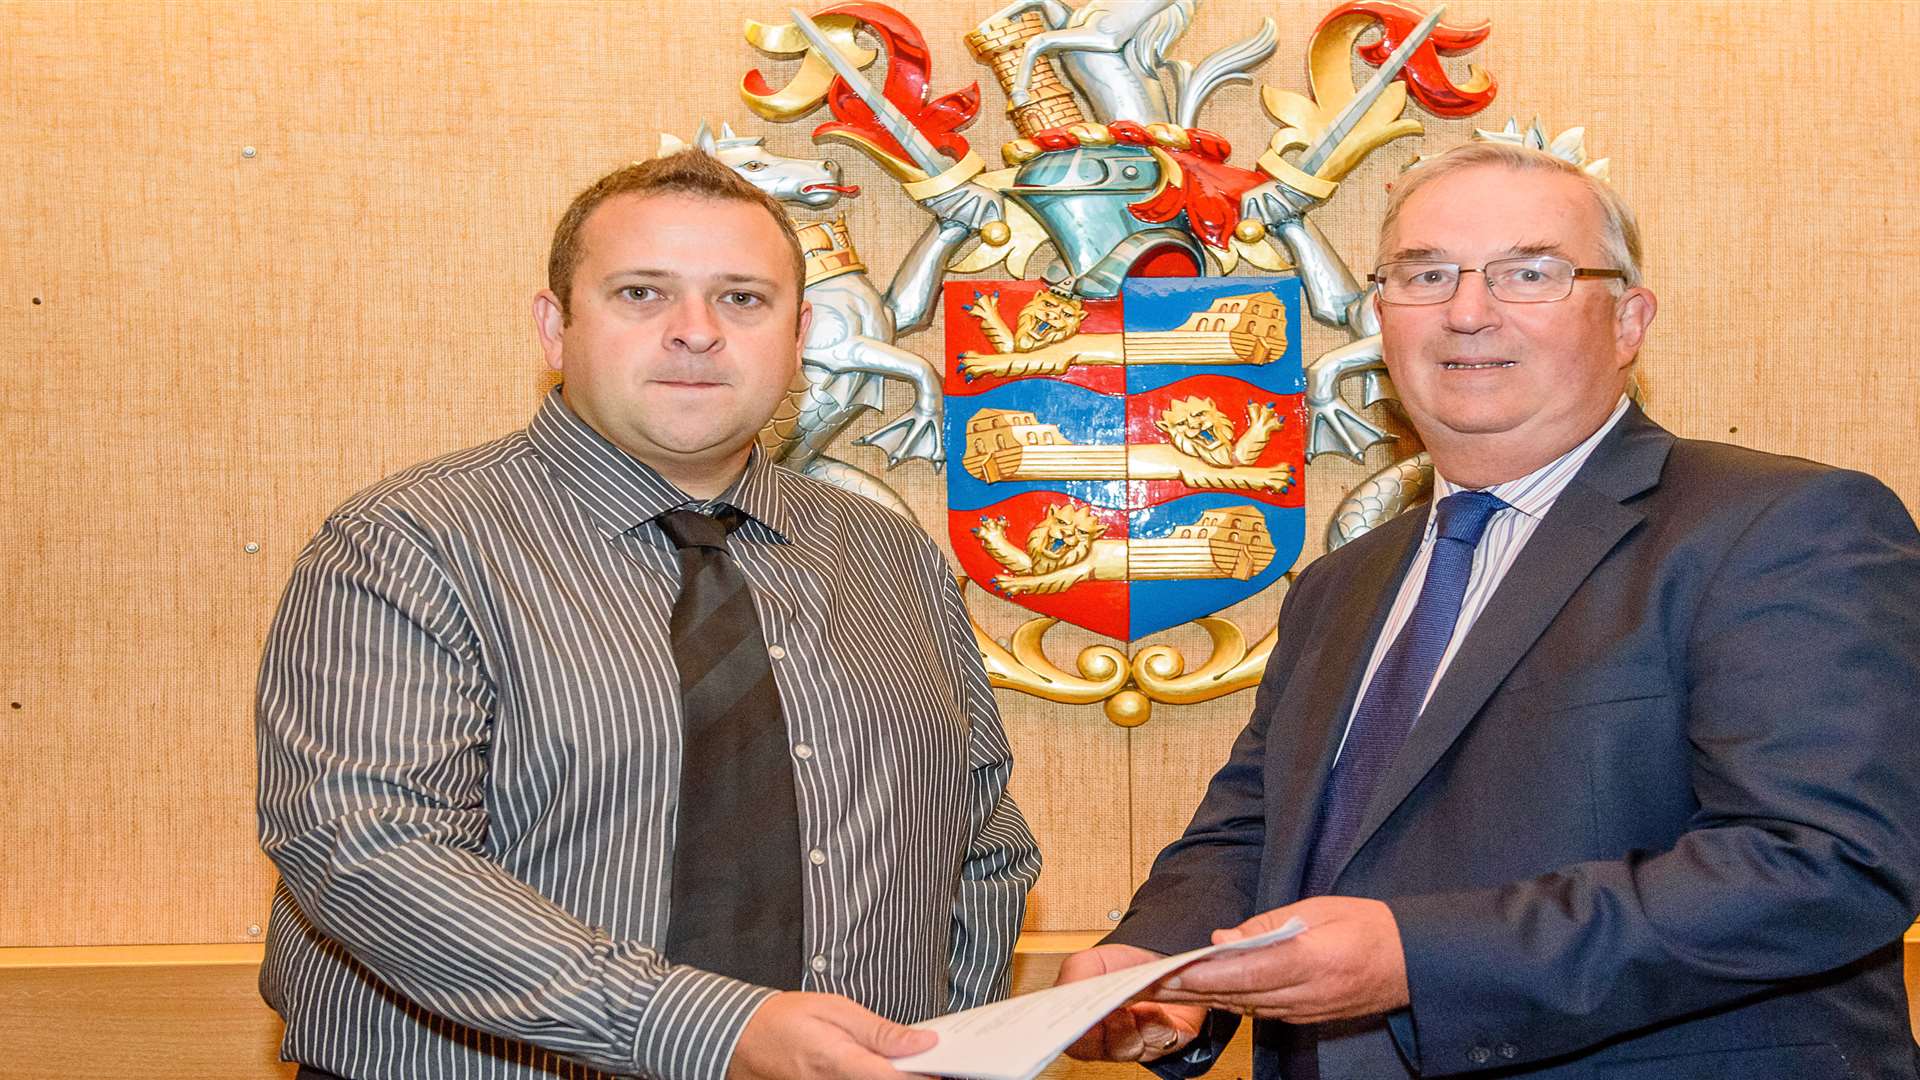 Peter Ward, Dover resident meeting Paul Watkins, leader of DDC handed over petition about Dover Leisure Centre